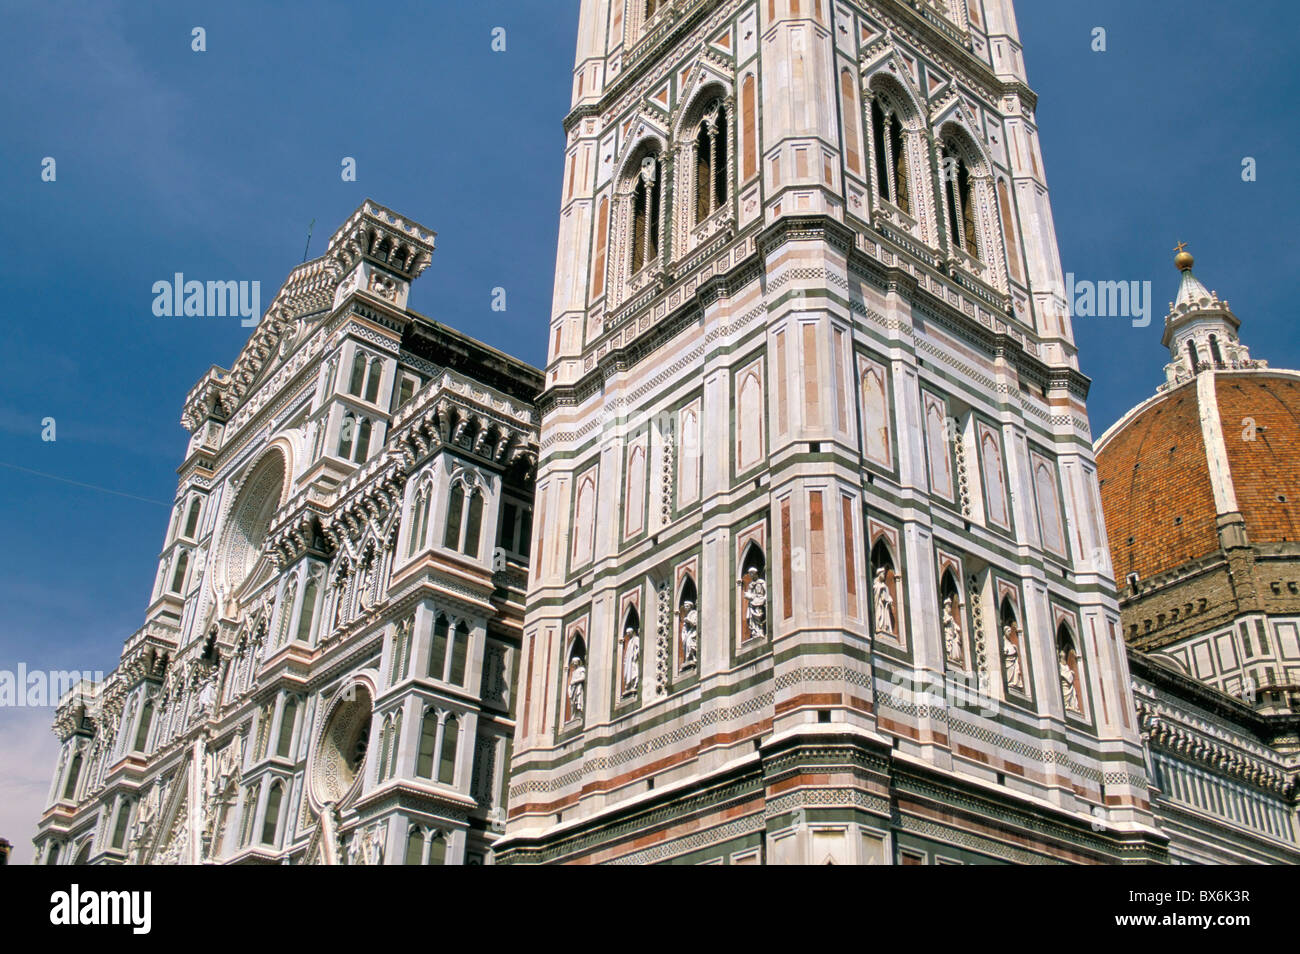 Duomo and campanile (cathedral and bell tower), Florence, UNESCO World Heritage Site, Tuscany, Italy, Europe Stock Photo